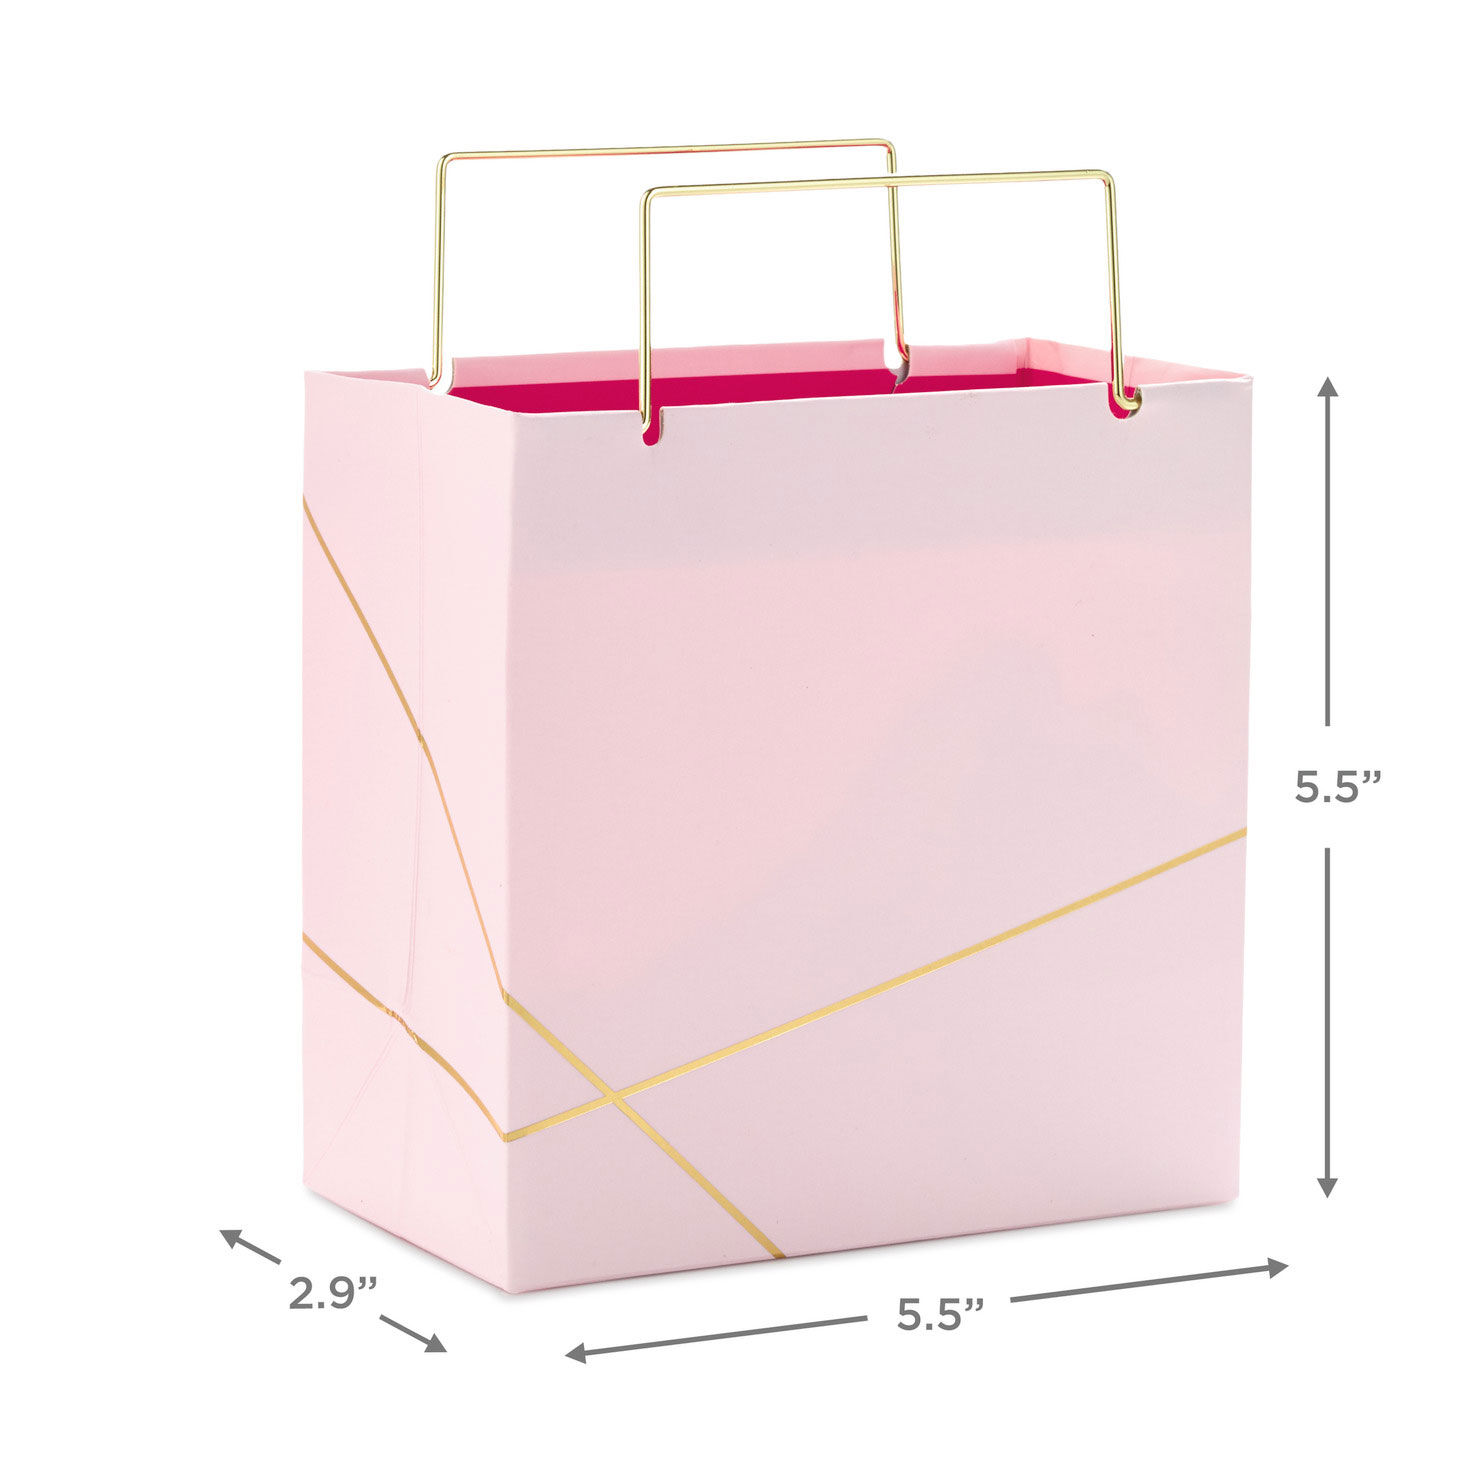 Light Pink With Gold Small Square Gift Bag, 5.5" for only USD 4.99 | Hallmark